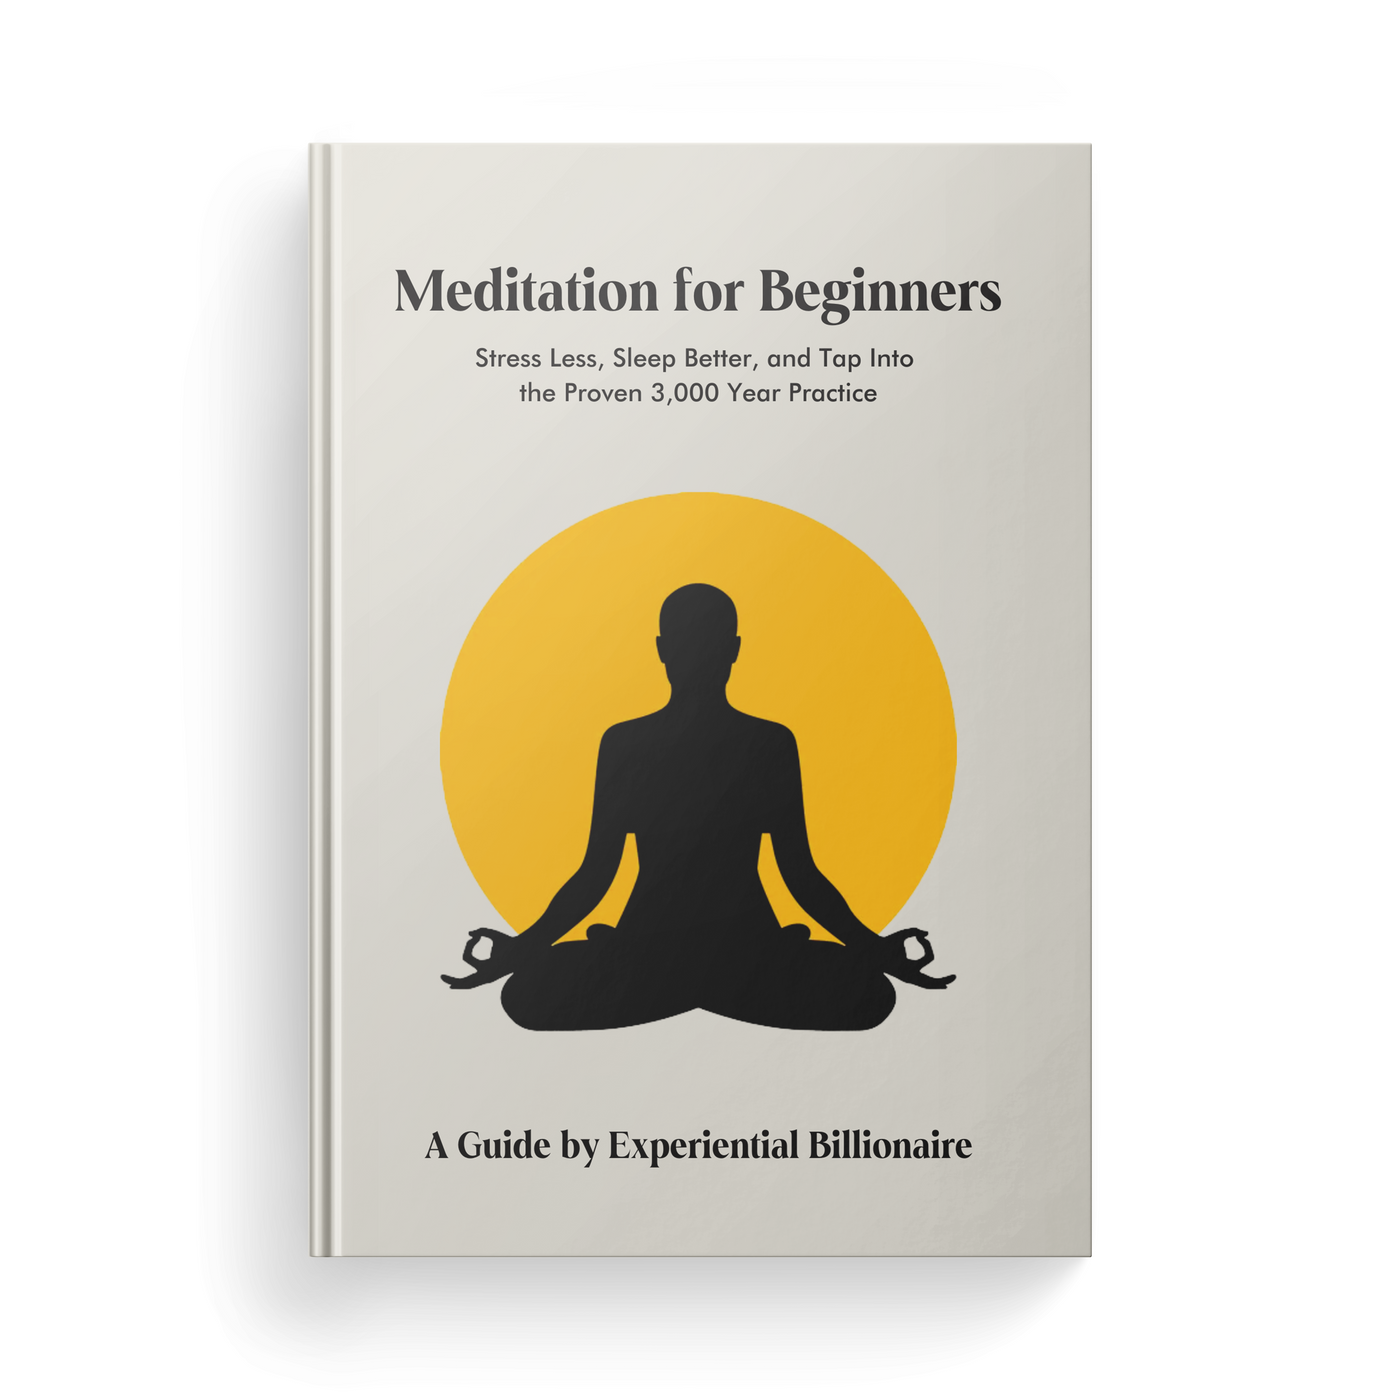 Experiential Billionaire's Guide to Meditation for Beginners